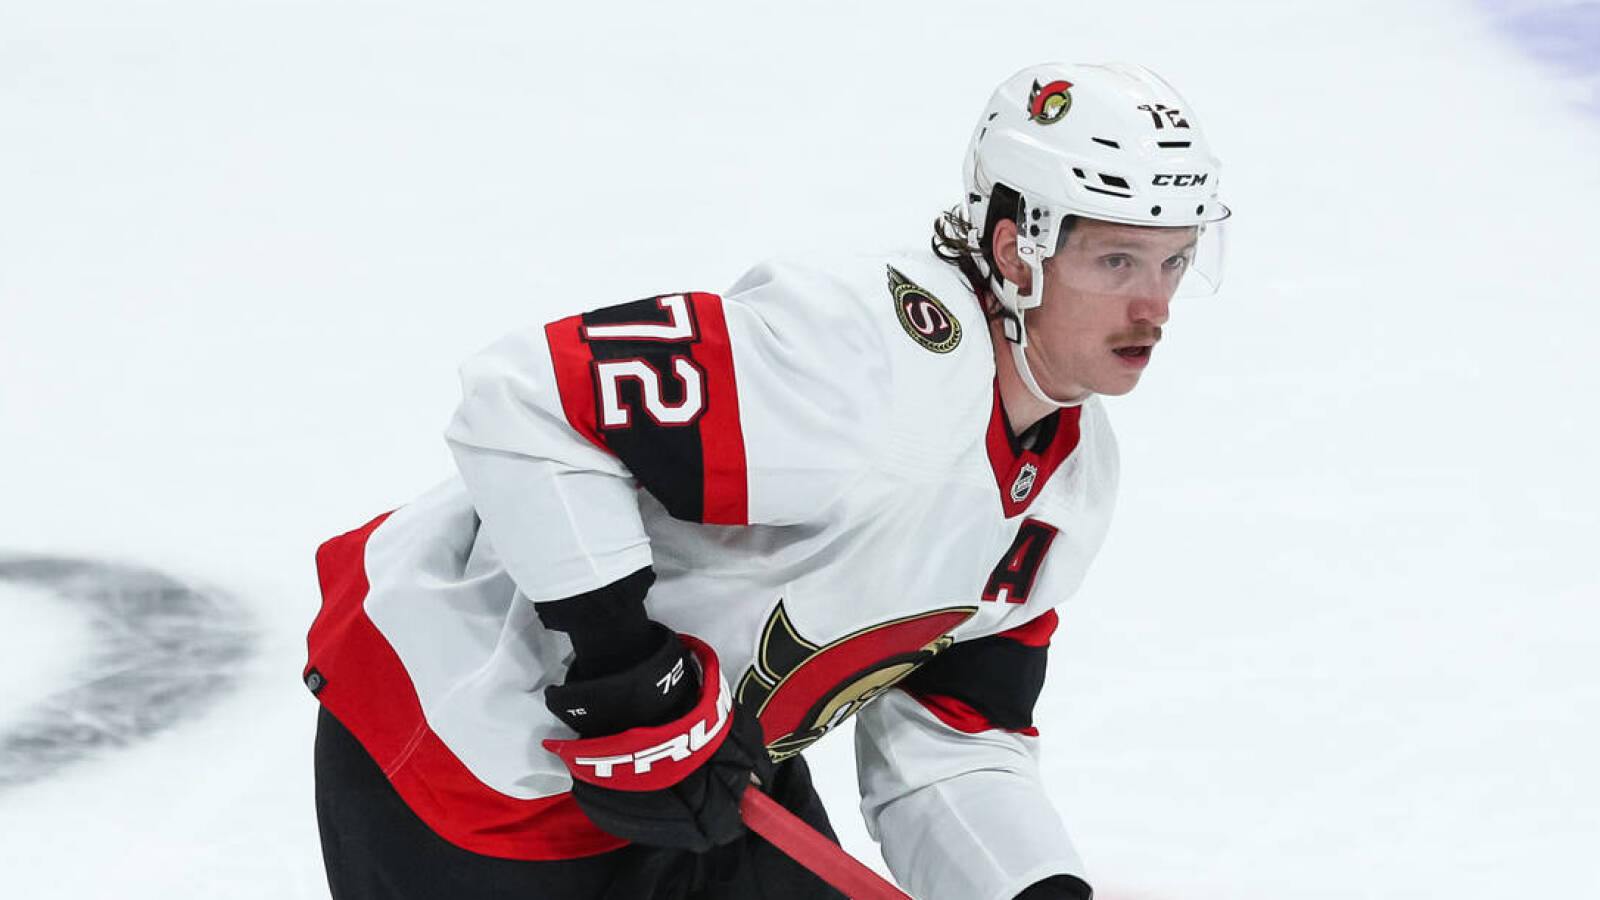 Finding Thomas Chabot a D-Partner